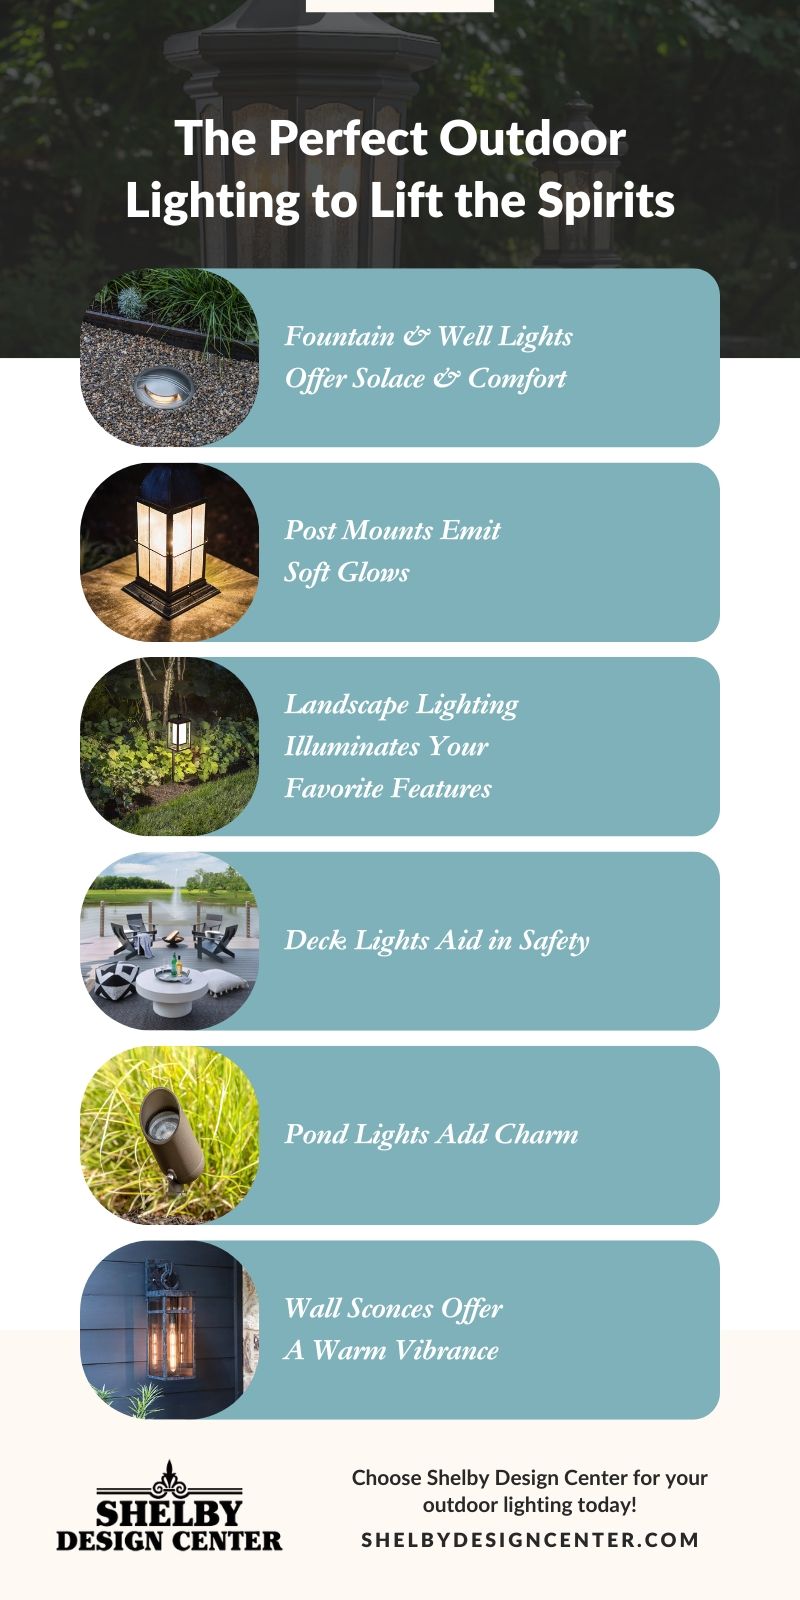 M11836 - The Perfect Outdoor Lighting to Lift the Spirits - Infographic.jpg